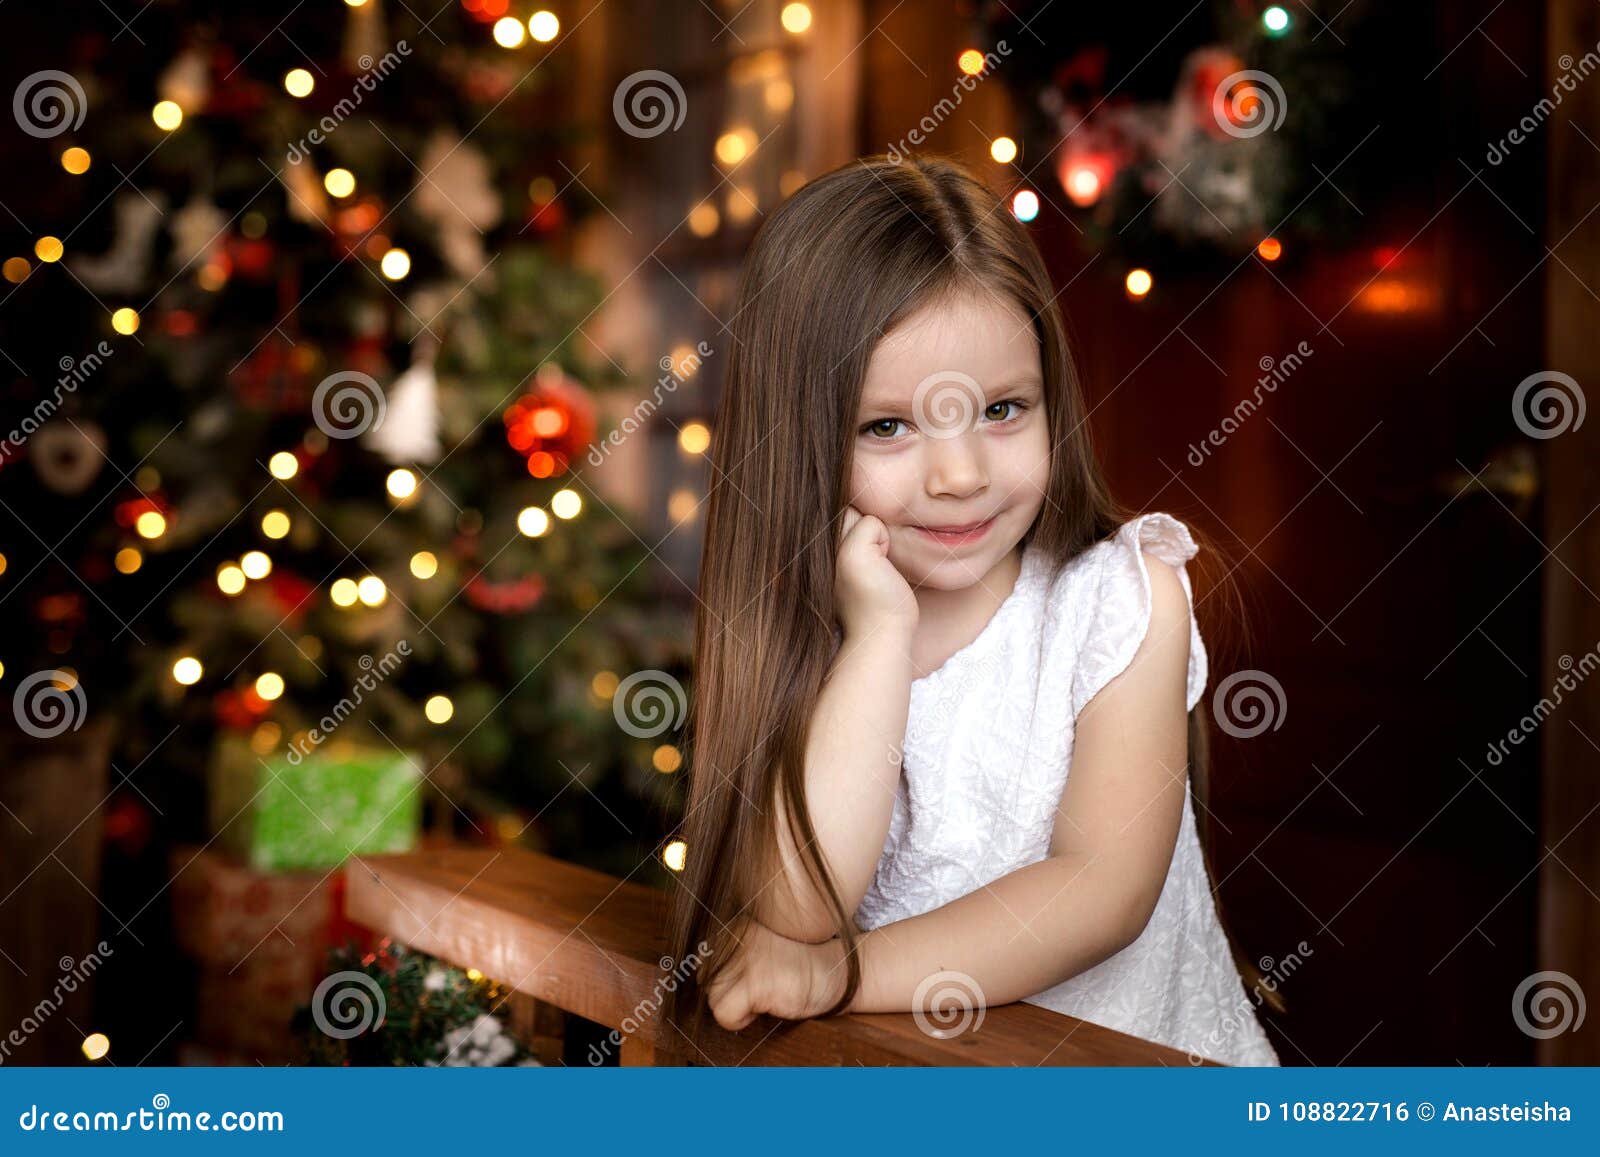 On Christmas Night a Little Girl Waiting for Santa Claus. Stock Photo ...